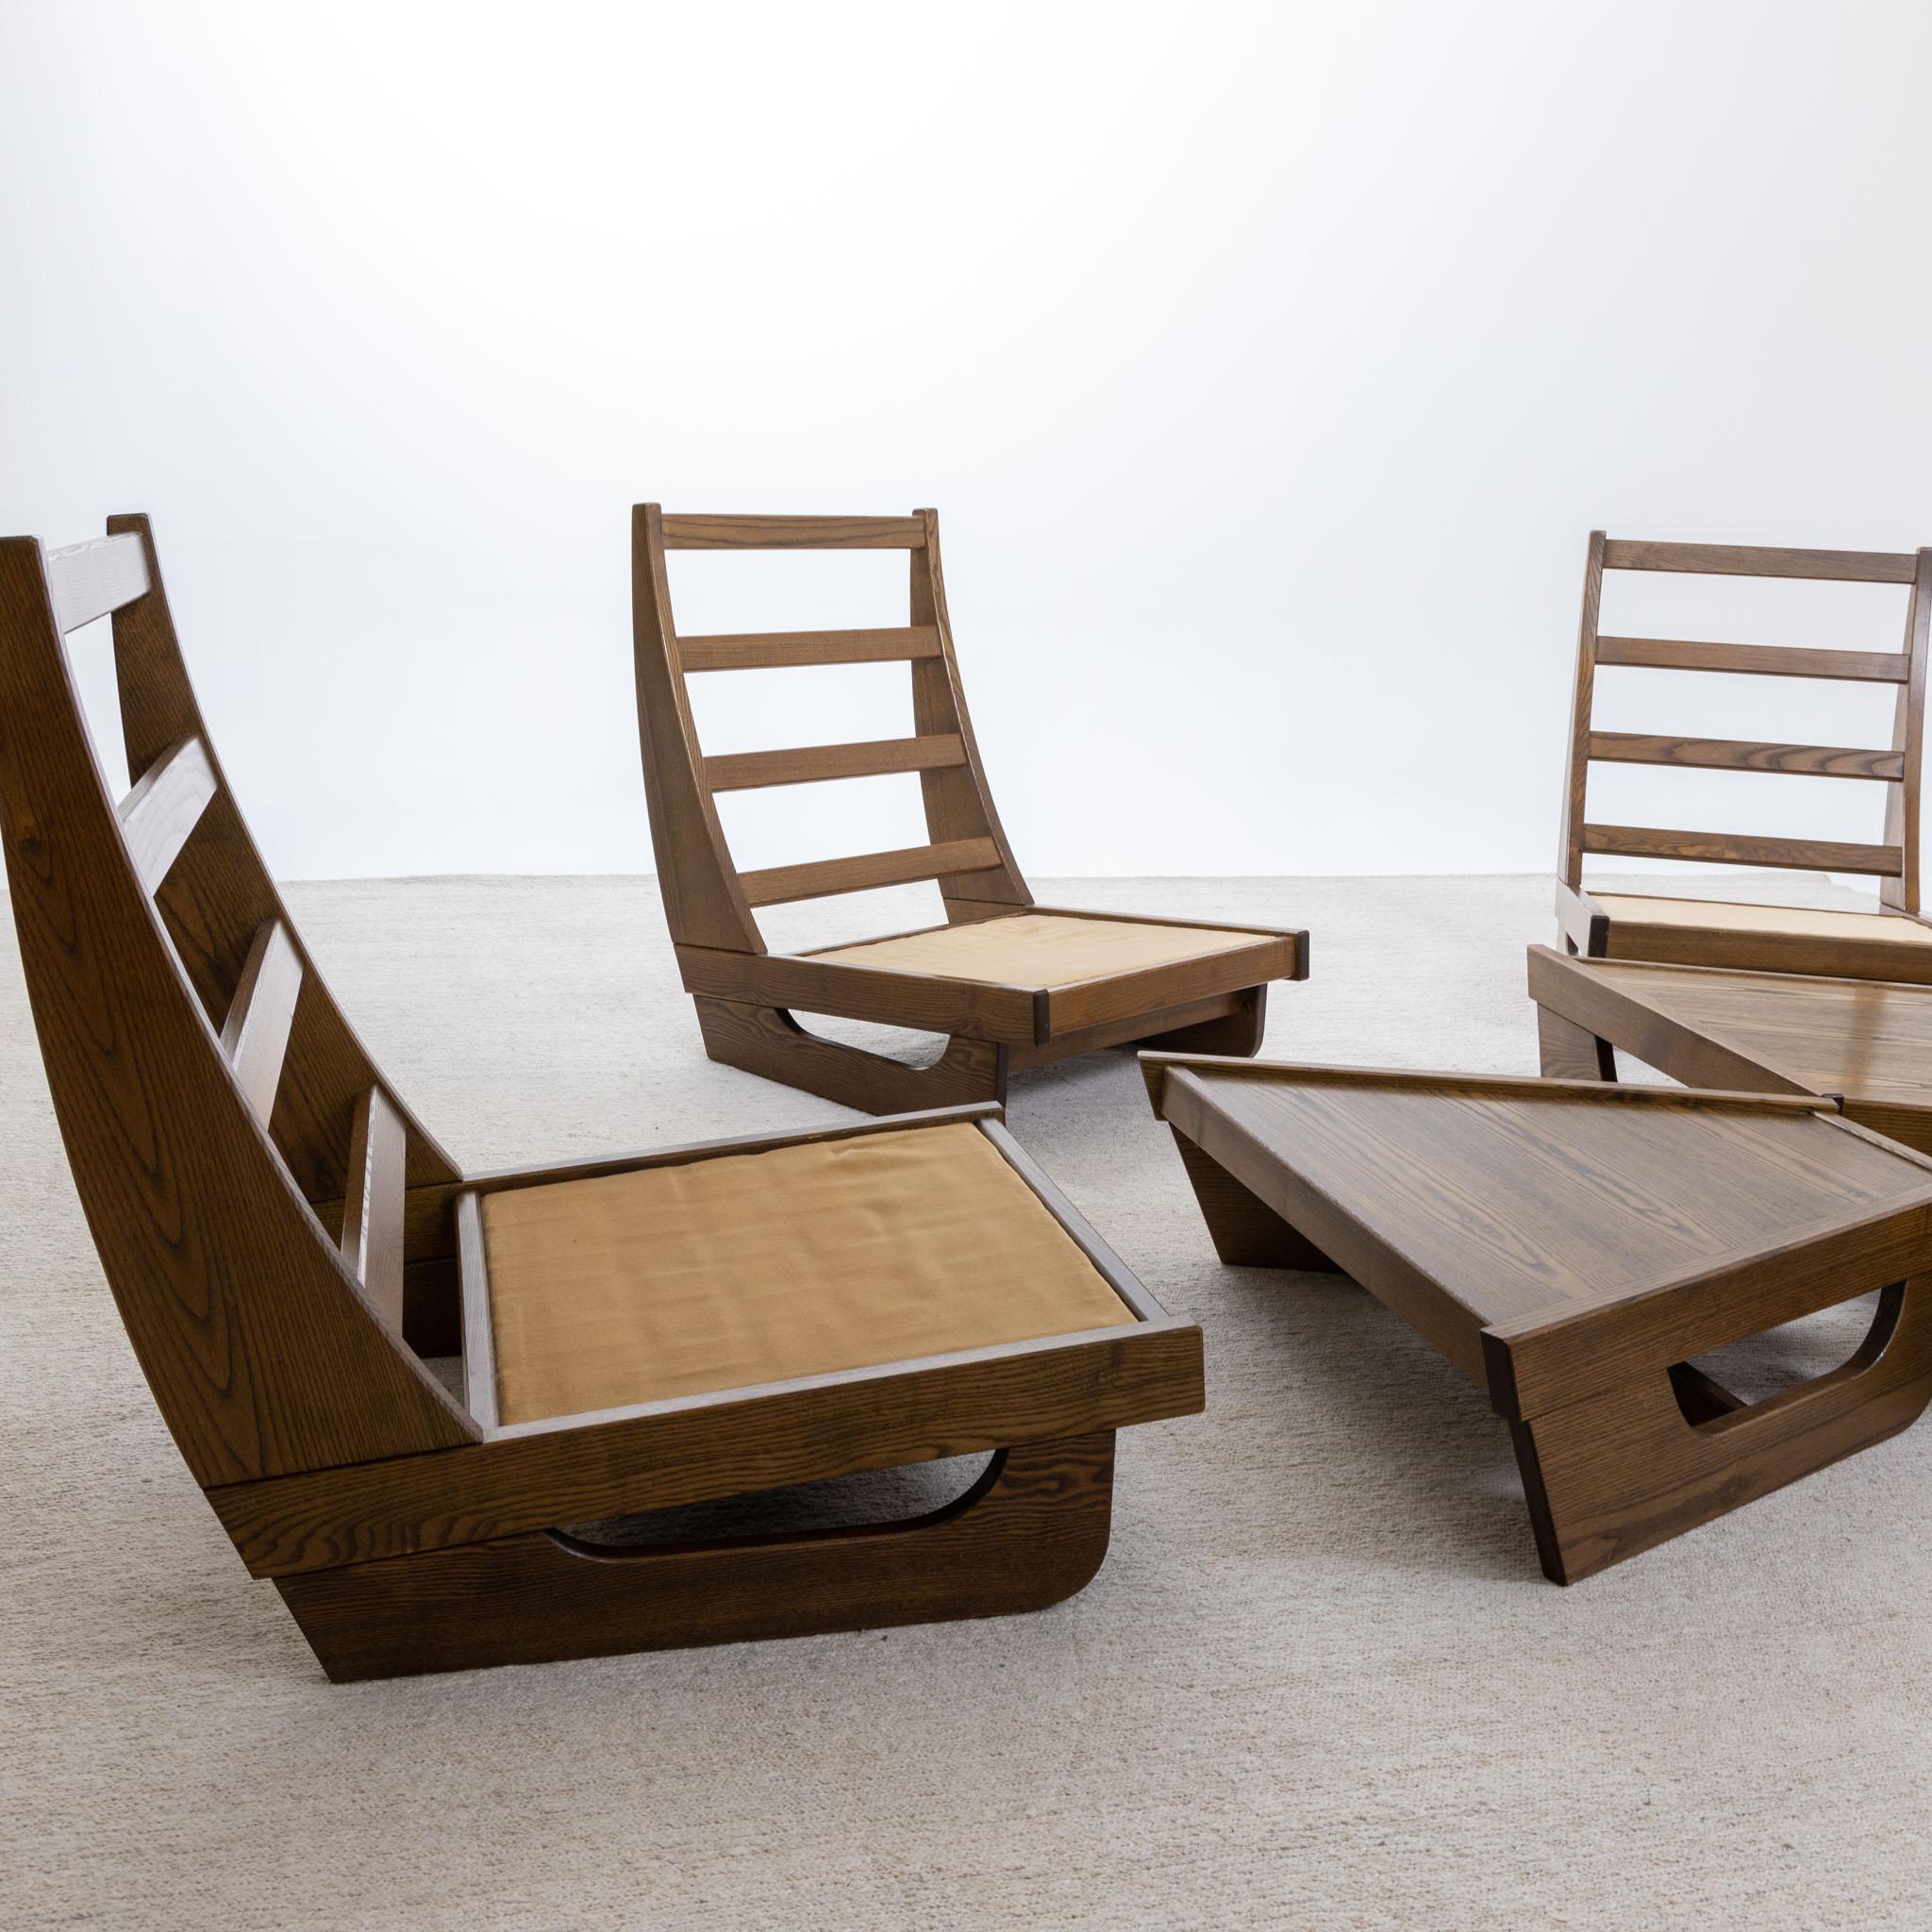 Modular Seating Group with five Lounge Chairs, Italy 1950s For Sale 9